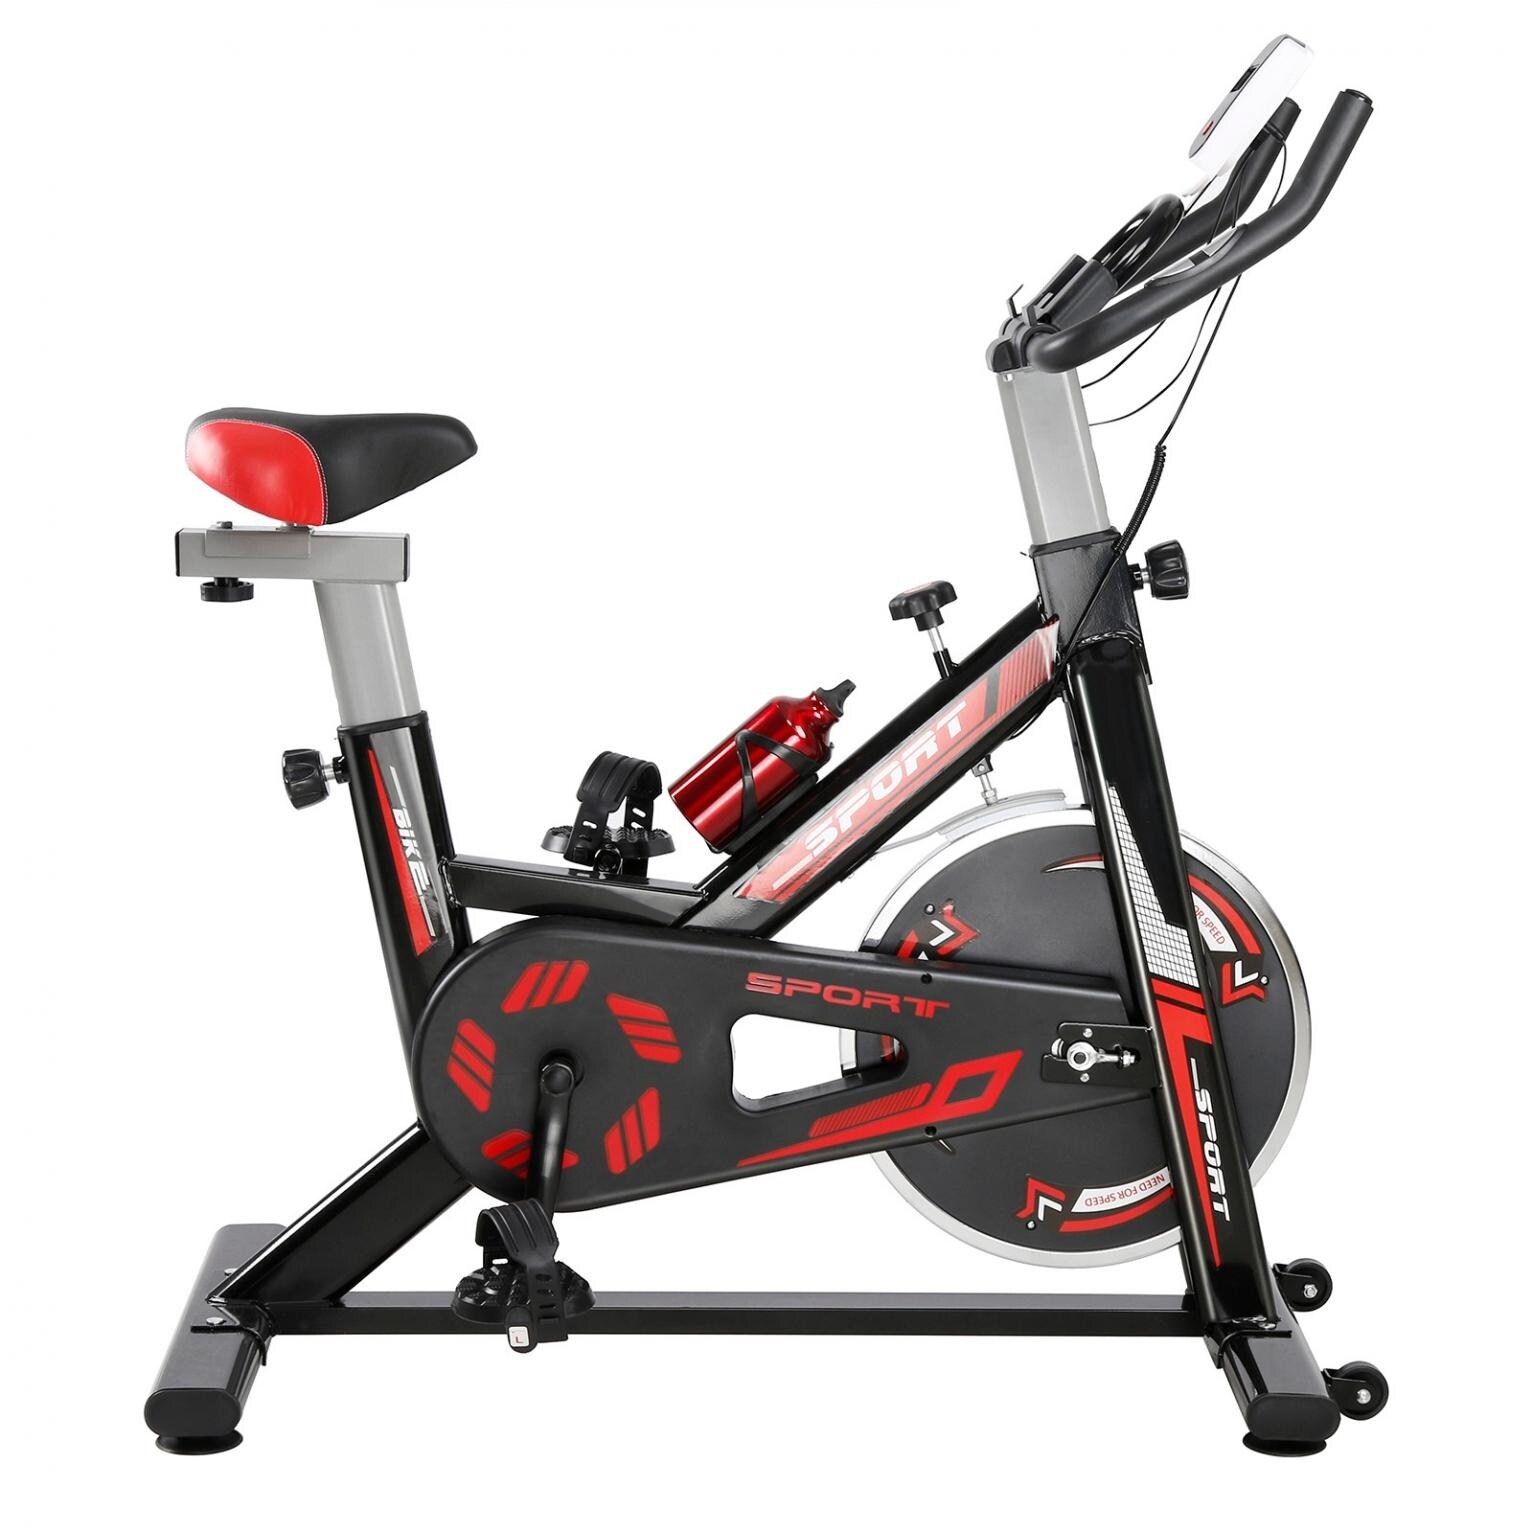 https://ak1.ostkcdn.com/images/products/is/images/direct/547801af0d1d5f9a170845bcd9101616936c6a27/Professional-Fitness-Exercise-Bike-With-LCD-Monitor.jpg